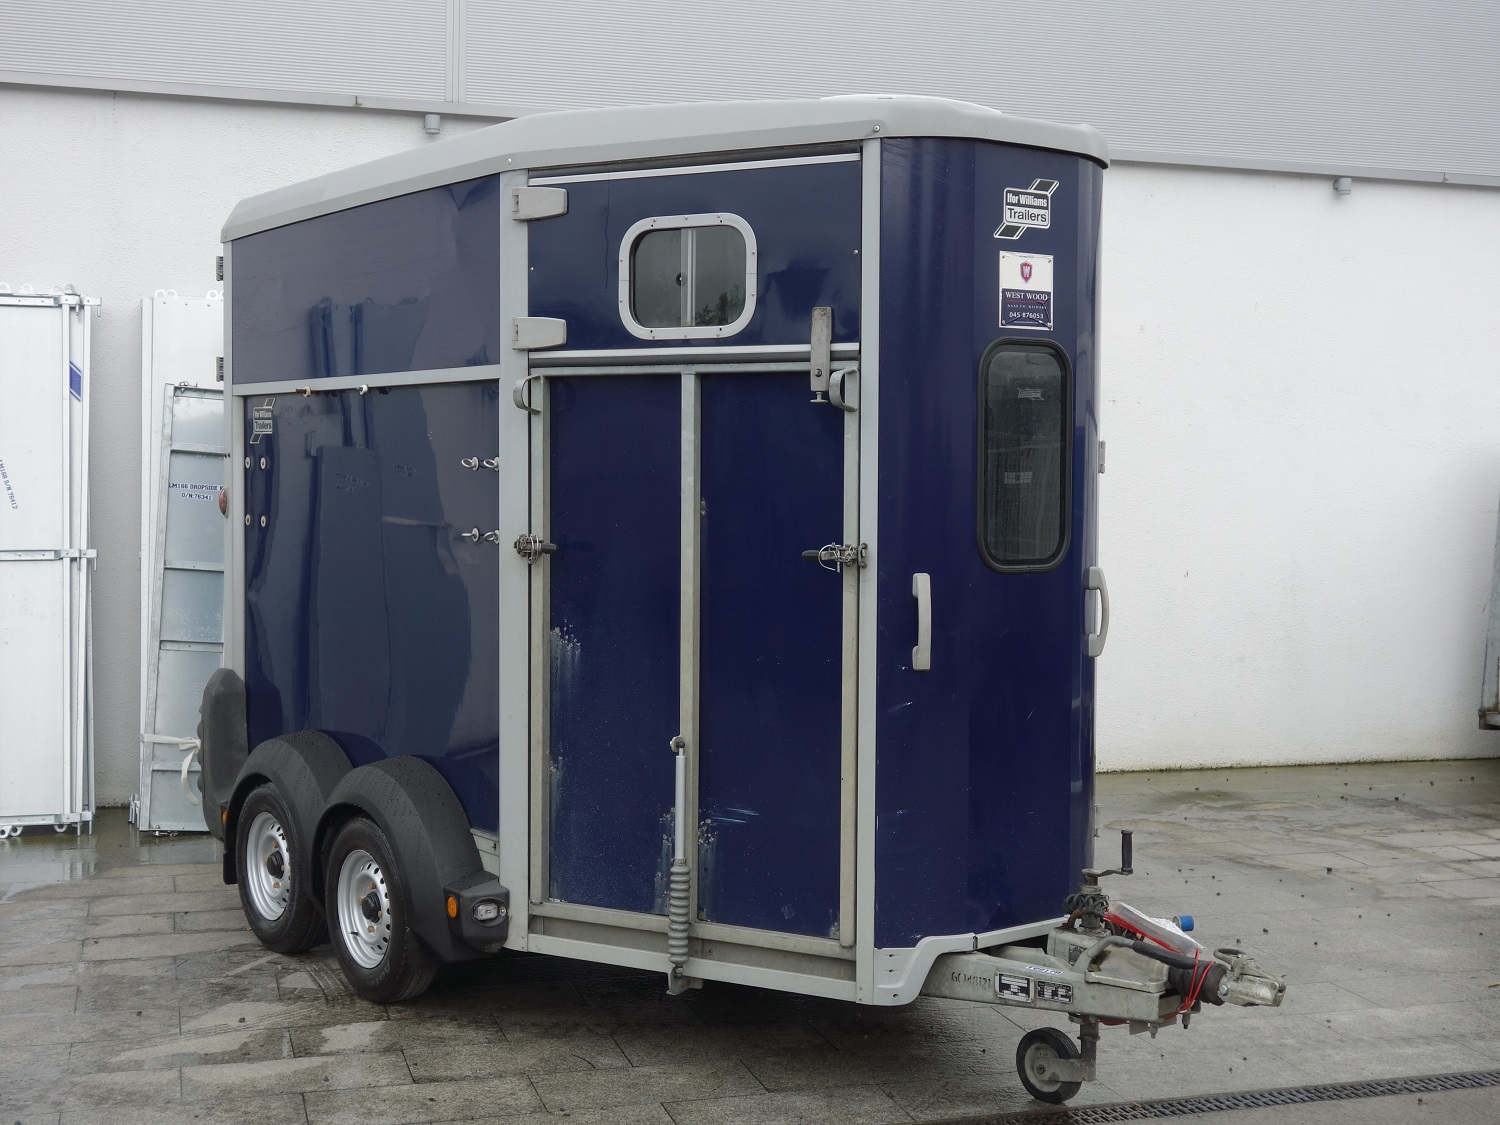 T09178: Used HB506 Deluxe Horsebox with S/Windows and W/Trims BLUE